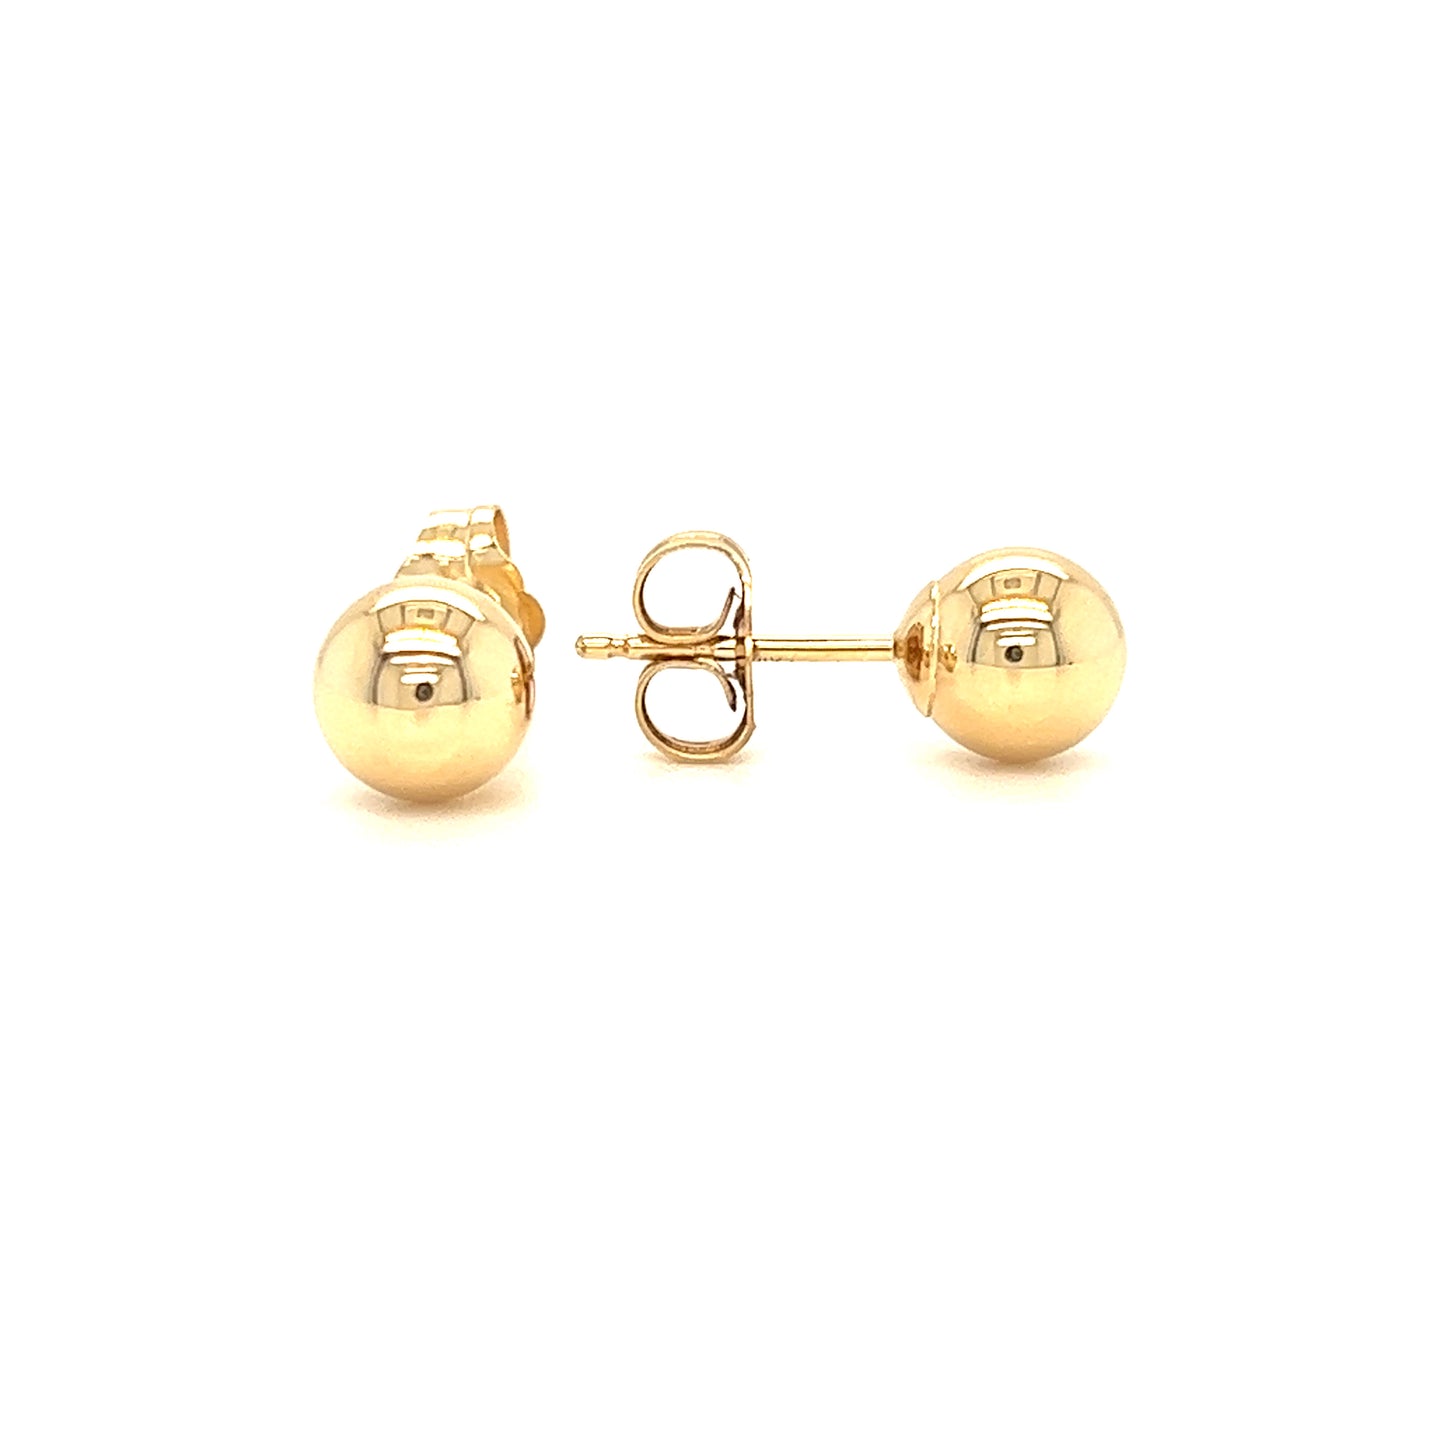 Ball 6mm Stud Earrings in 14K Yellow Gold Front and Side View